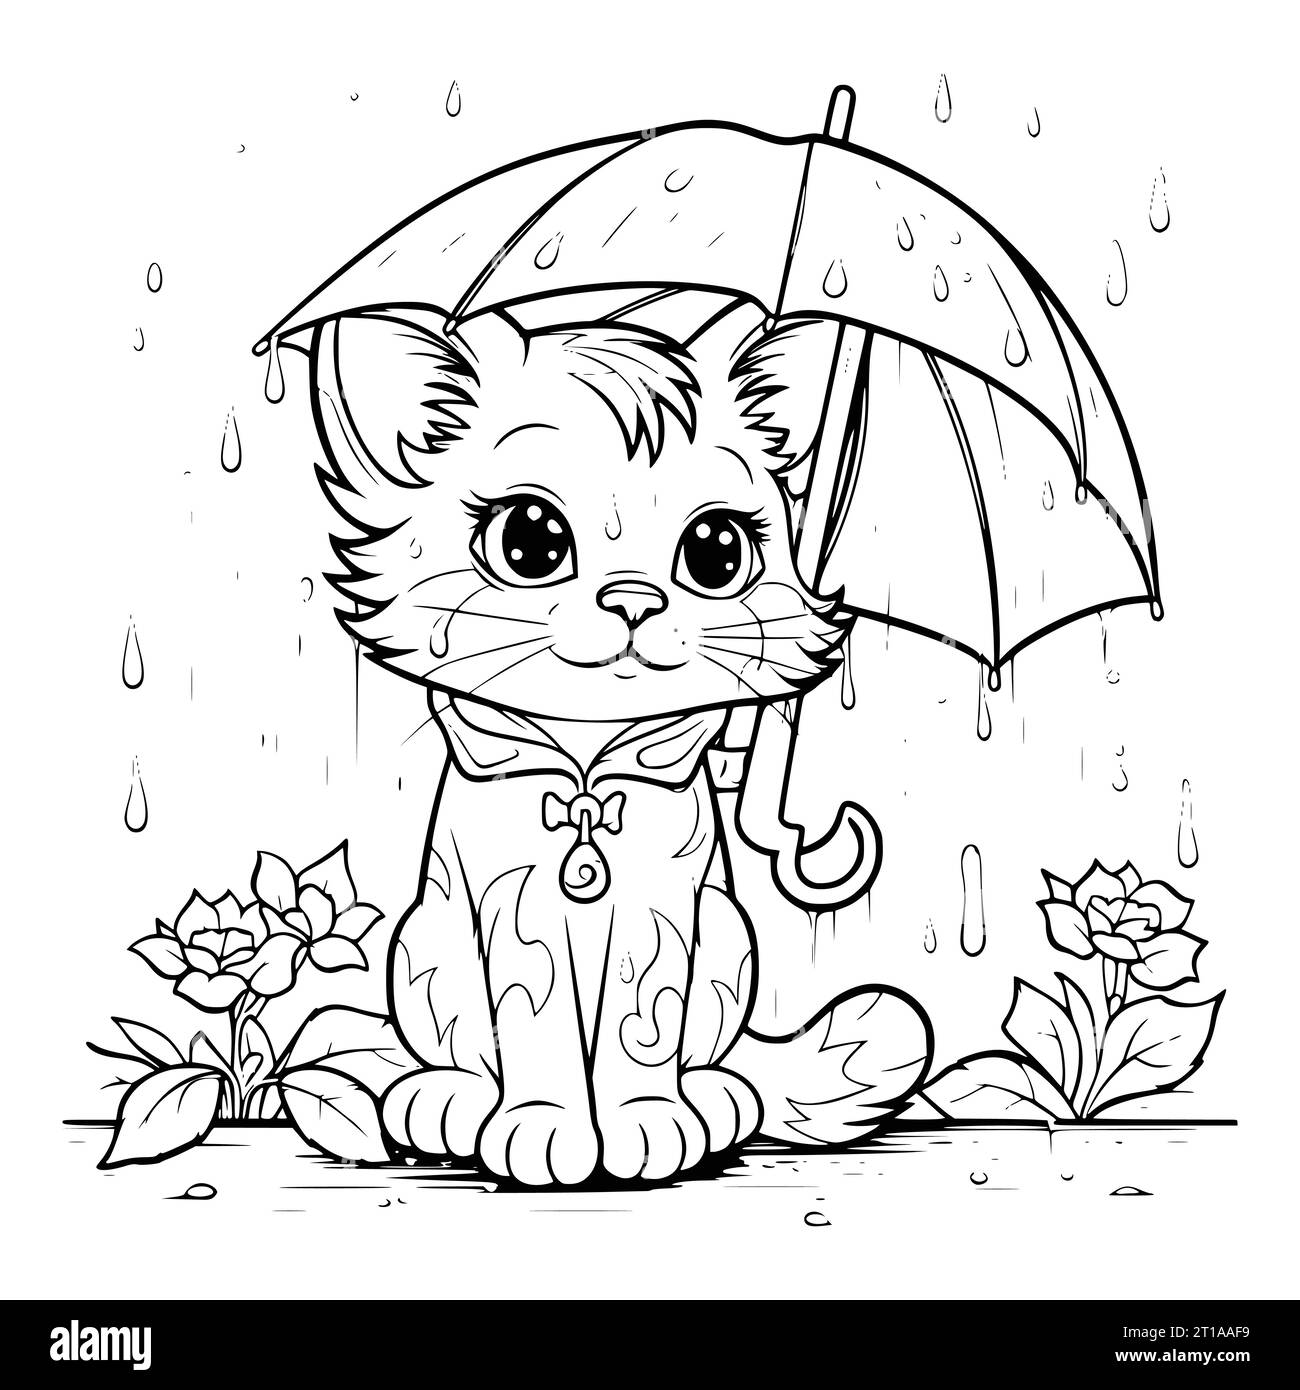 Cat In Rainy Day Coloring Page For Kids Stock Vector